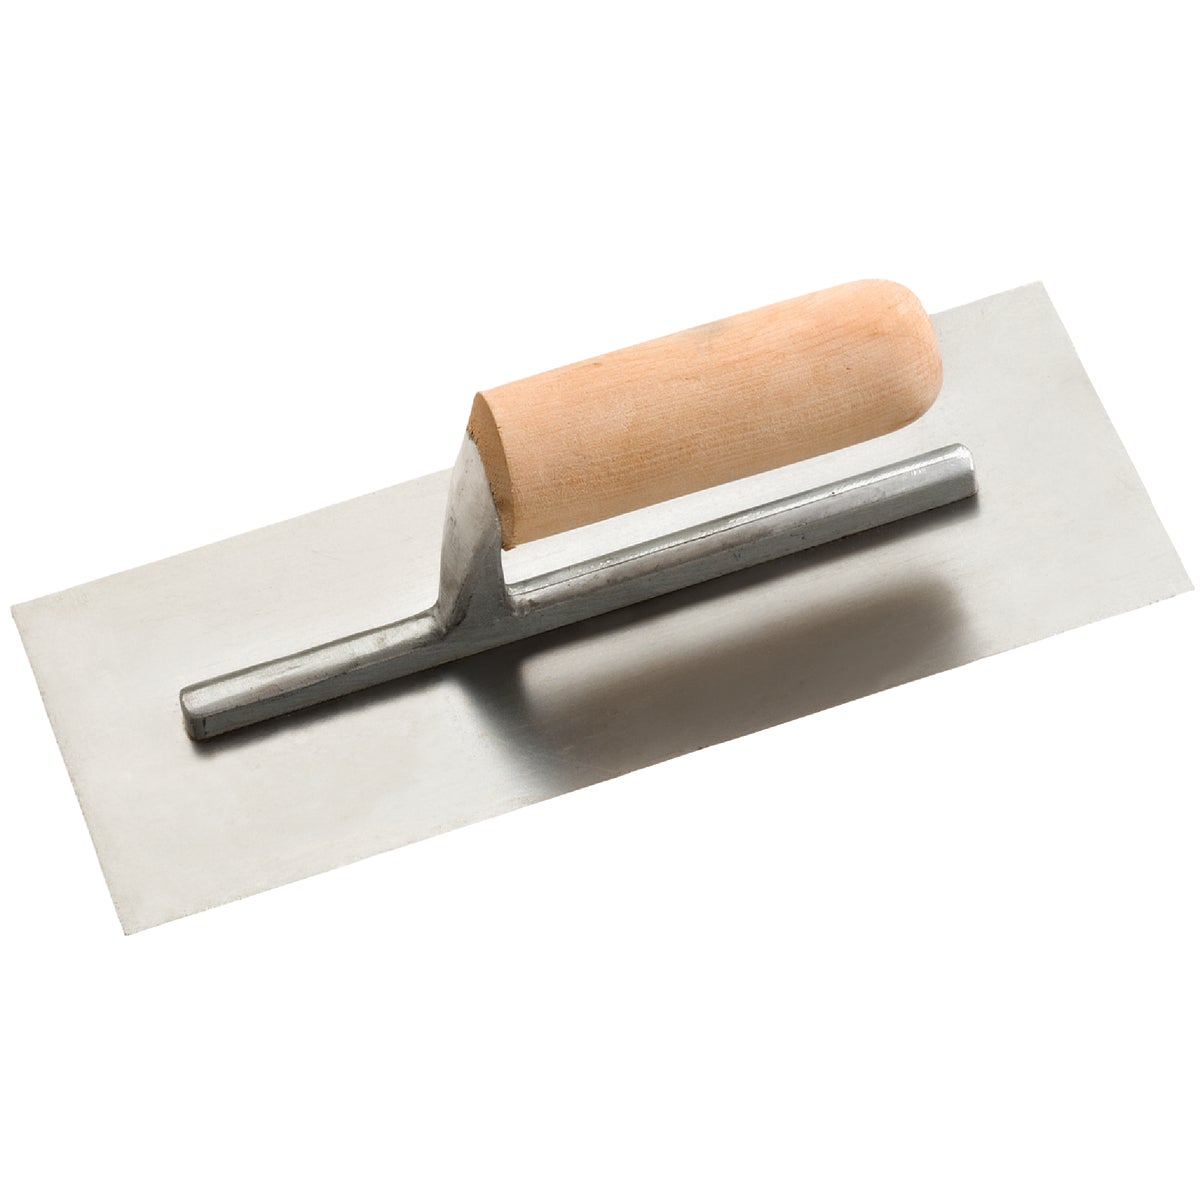 Item 322519, Trowels have a strong zinc alloy mounting: Resists rust and provides the 